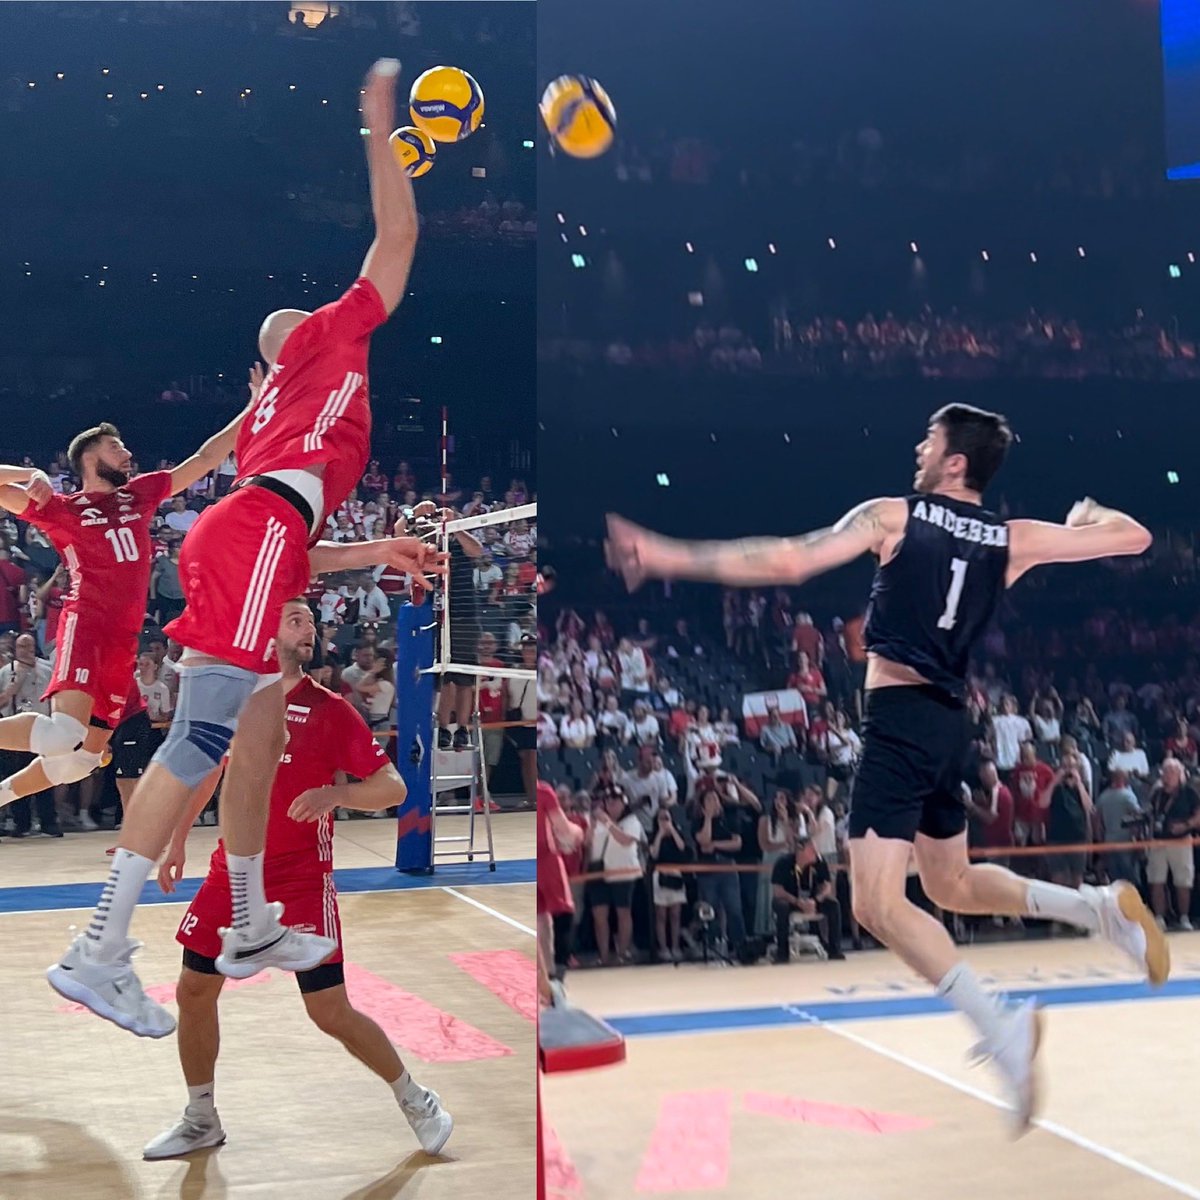 Gold medal match! 🥇 USA v Poland in #VNLFinals 11am PT 💻 Catch the action on @volleyballworld (code ANNE20 will get you 20% off) 🇺🇸 v 🇵🇱 LETS GOOOO! #volleyball @usavolleyball